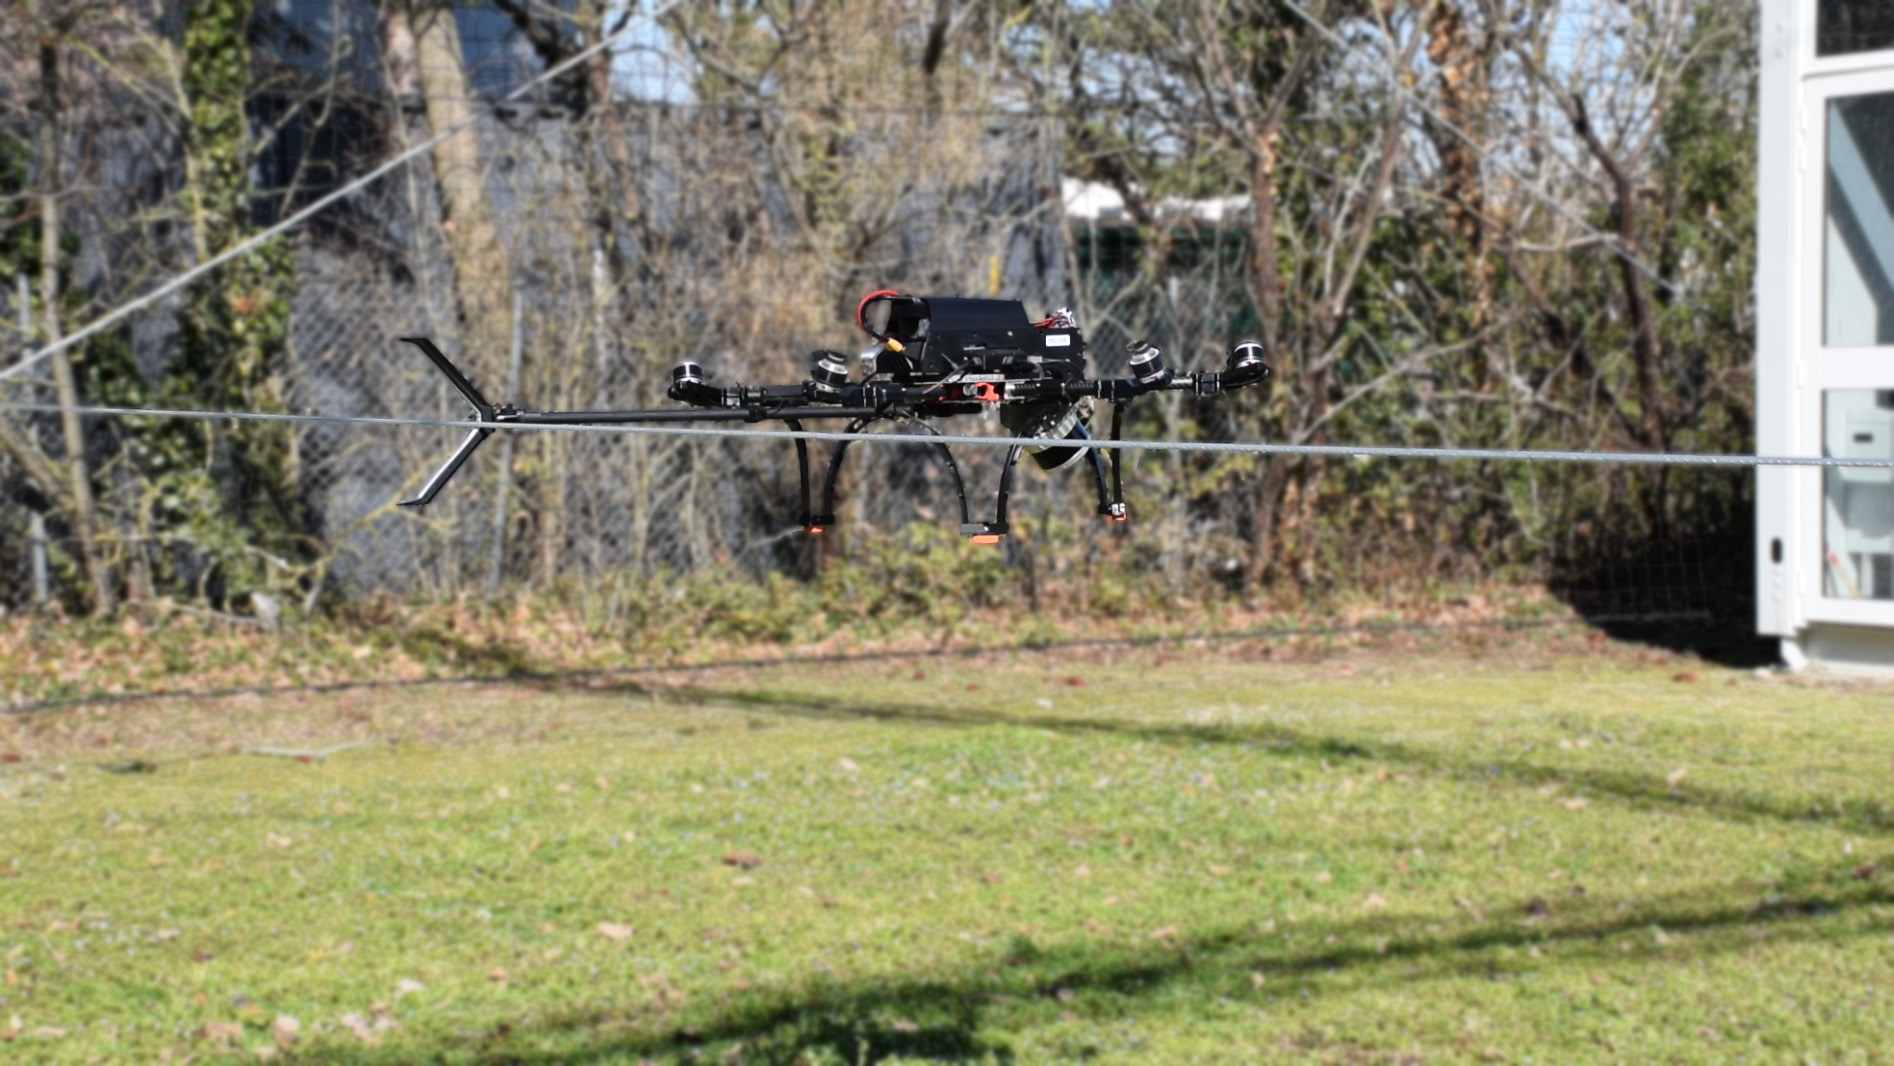 Donecle develops Aerial Co-Worker drones as part of the Aerial-Core project